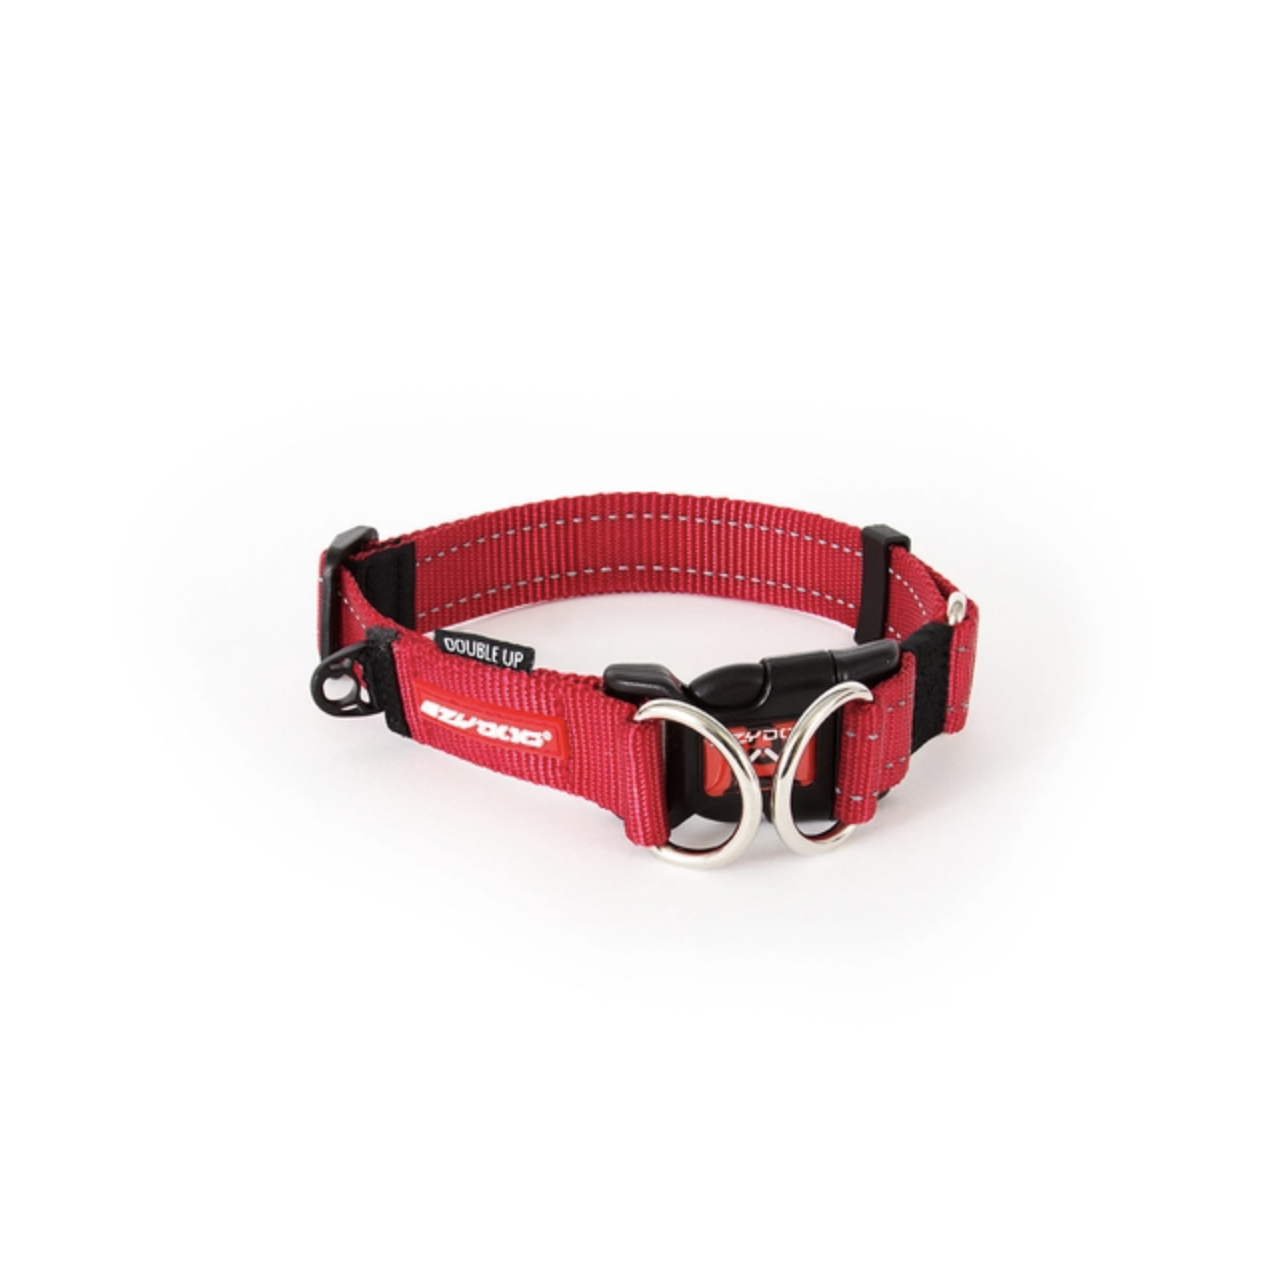 EzyDog Double Up Collar - Red